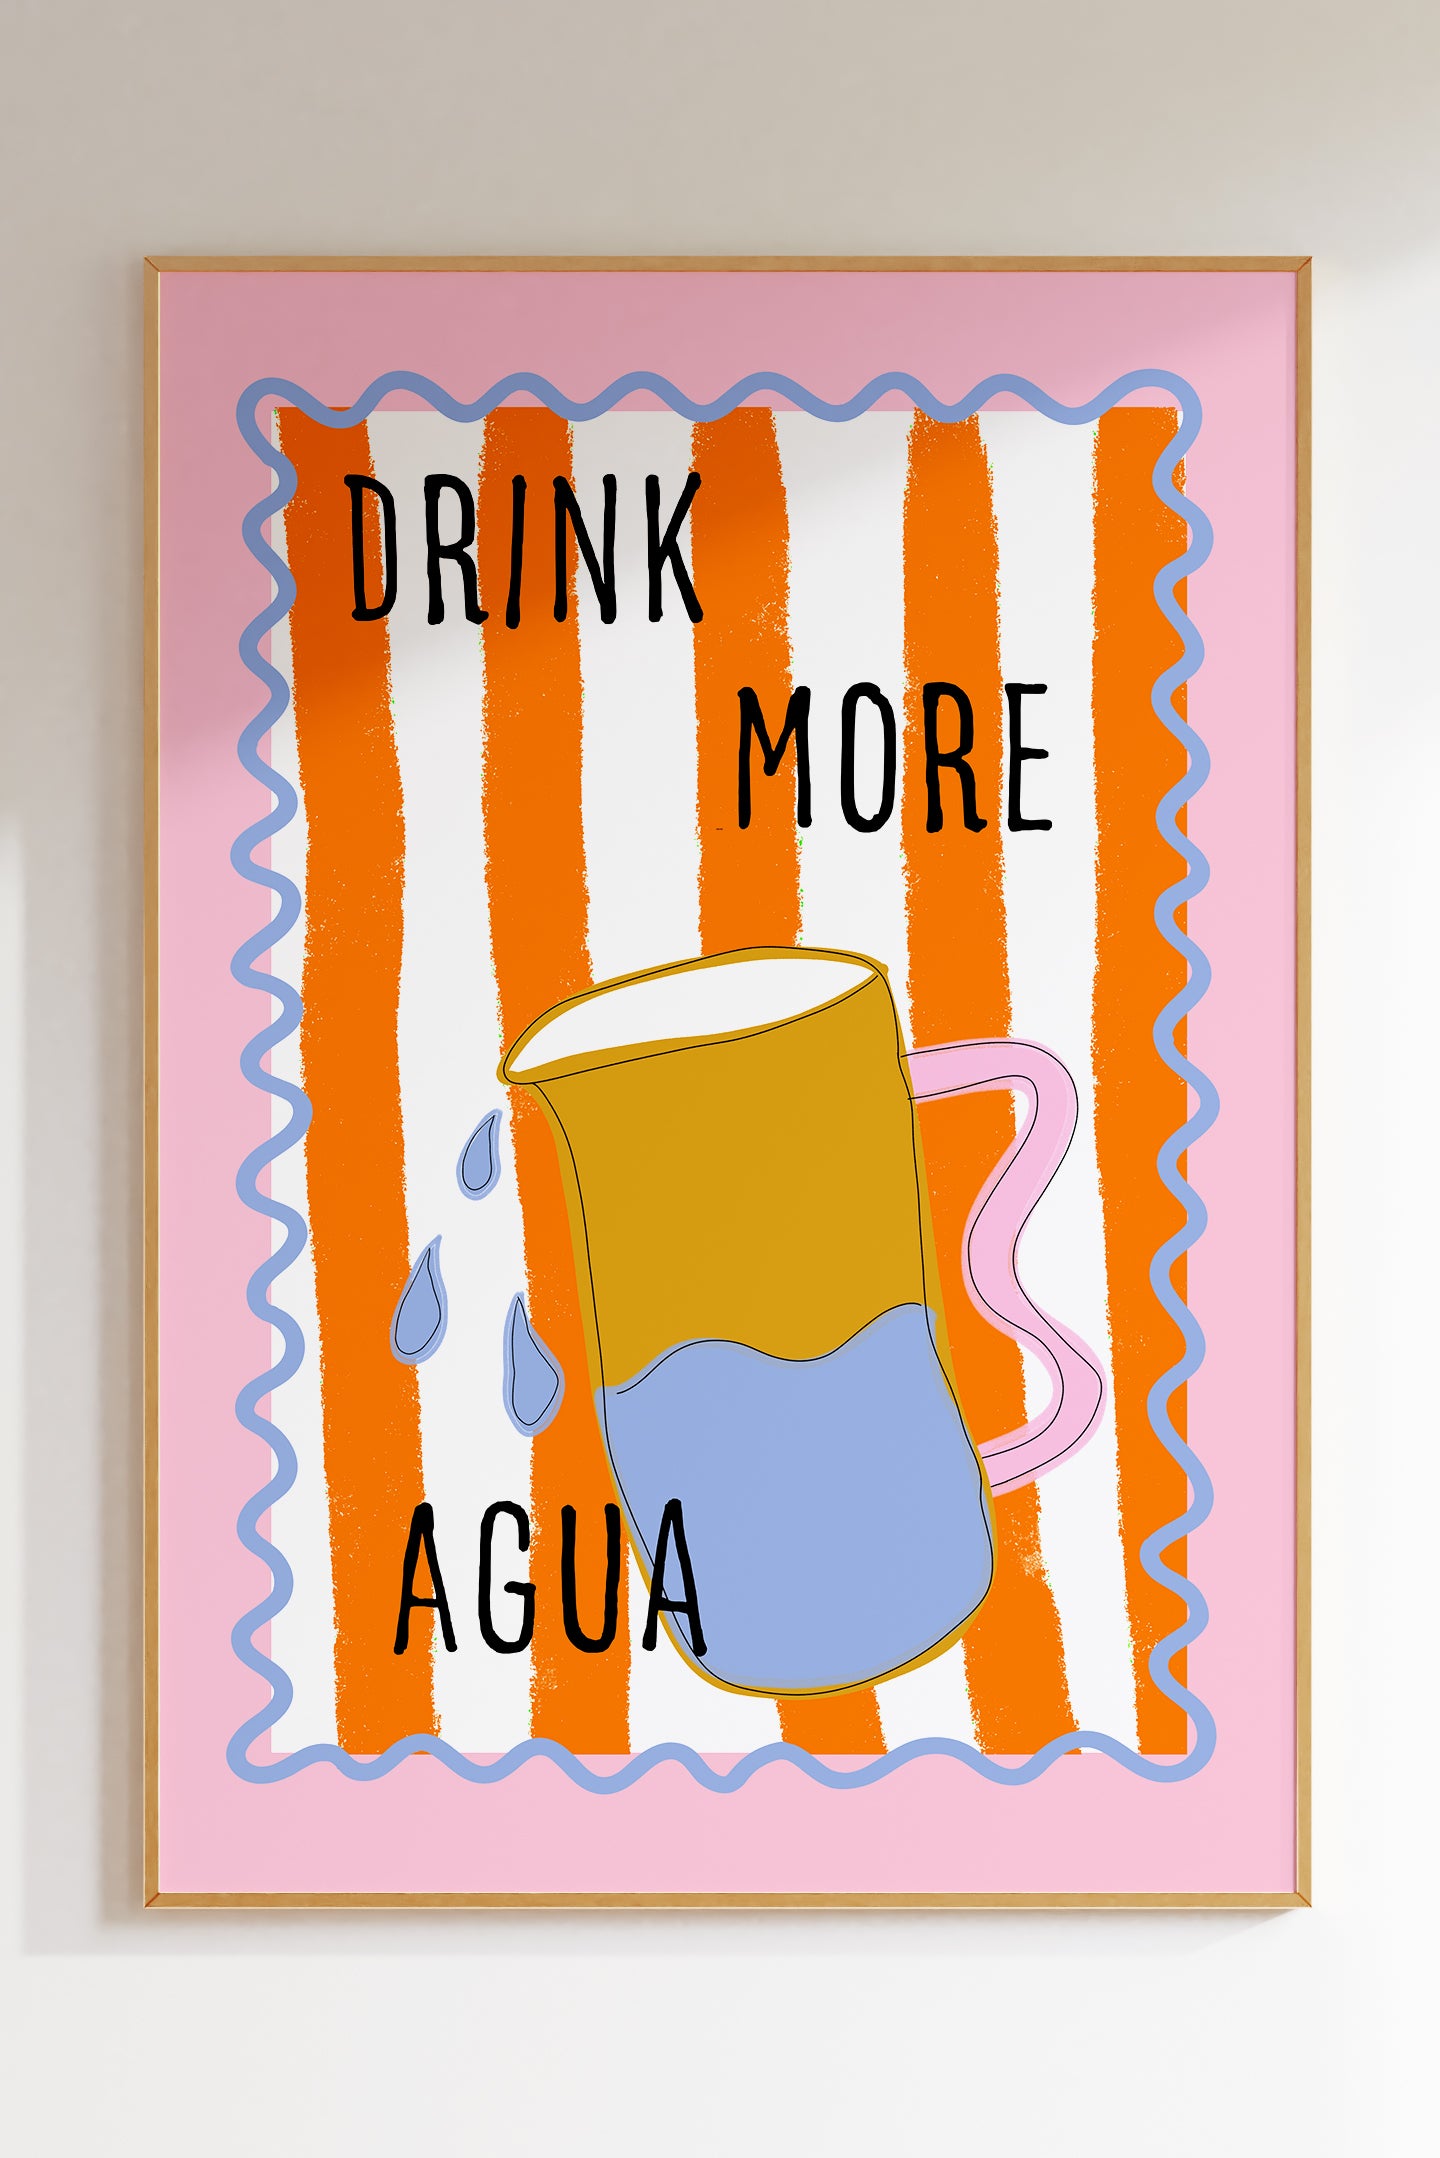 Drink More Agua